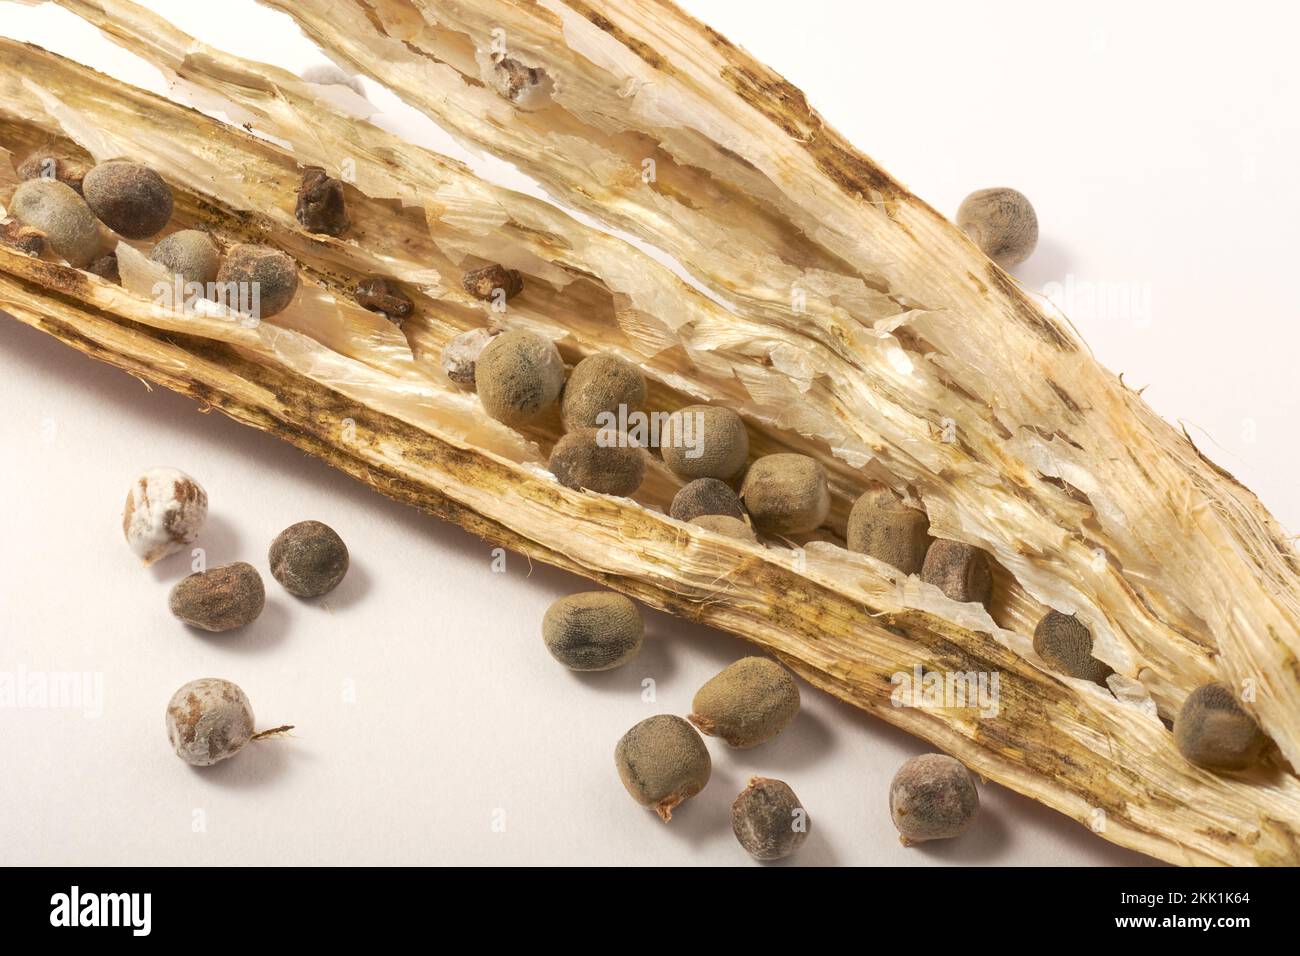 close-up macro view of okra or okro seeds with opened pod, also known as ladies' fingers, using dry vegetable to harvest seeds, isolated on white back Stock Photo